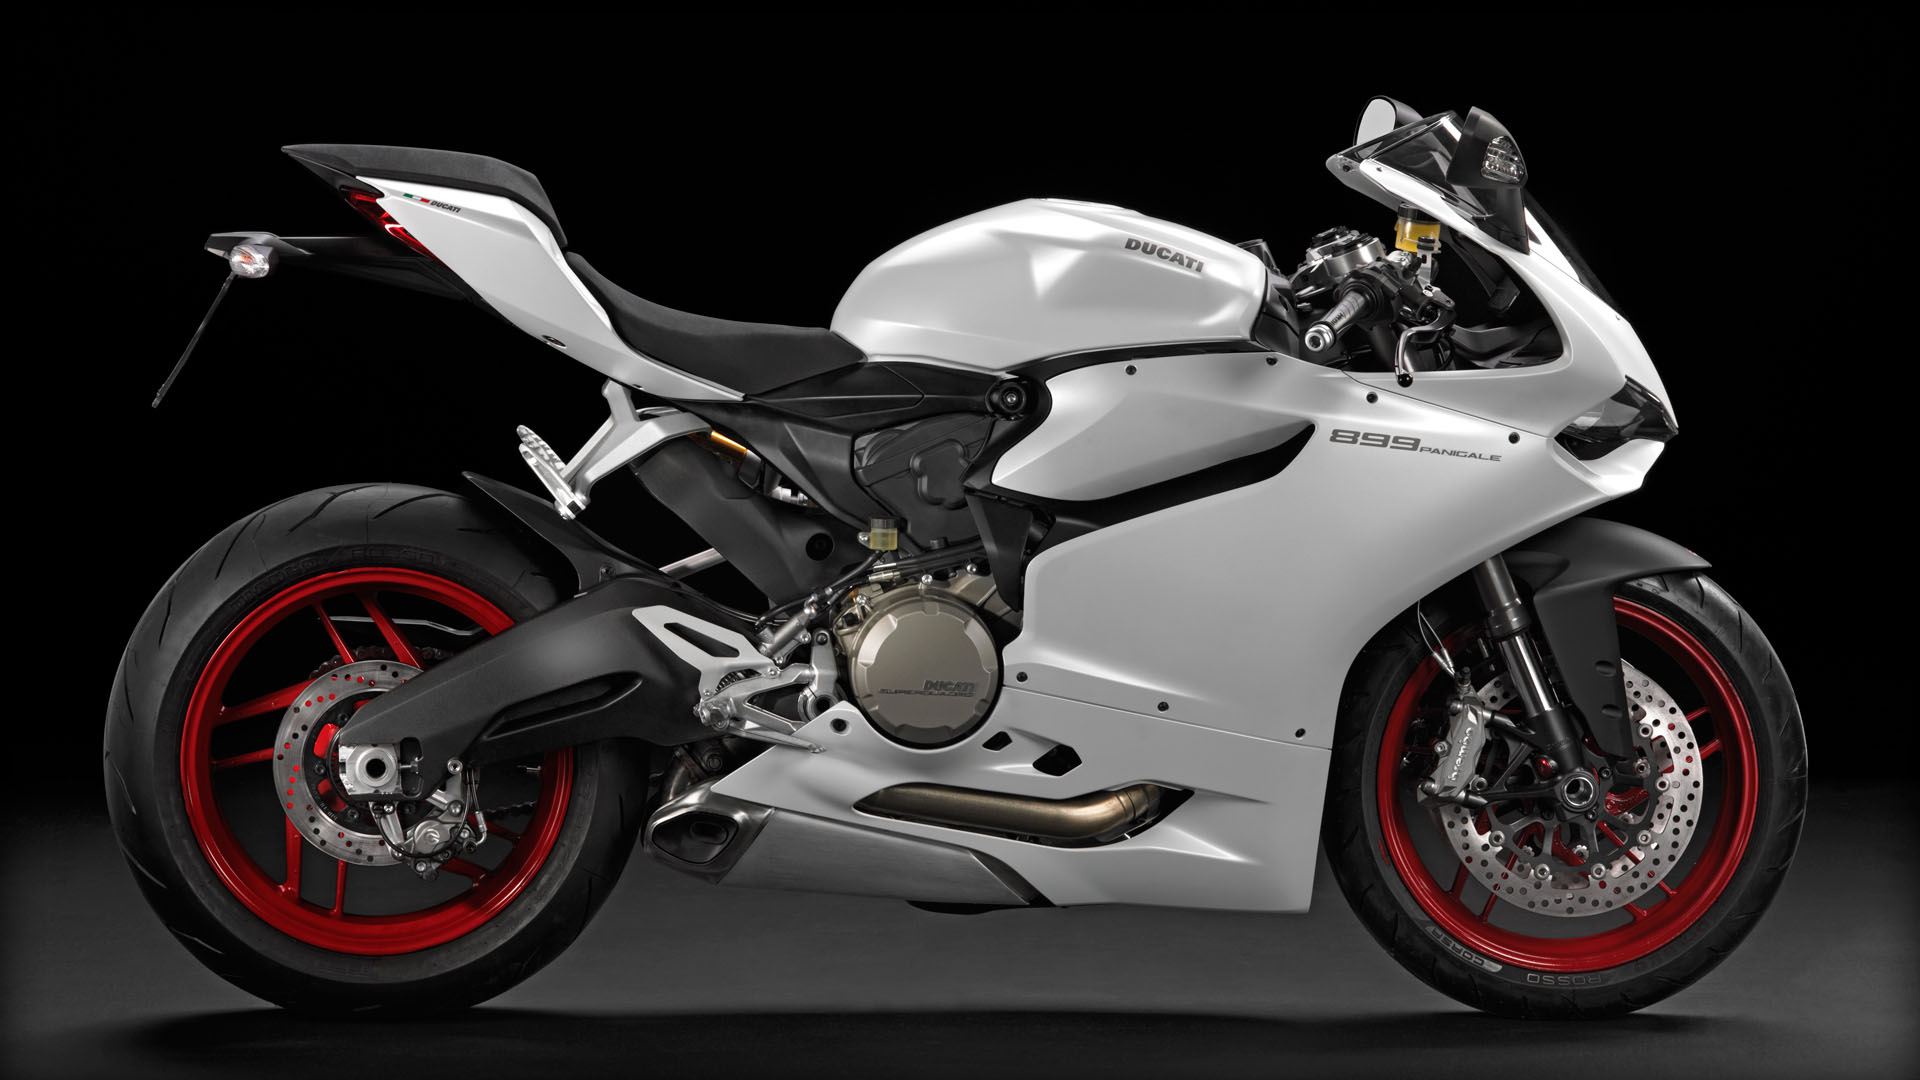 New 899 Panigale to compete in Ducati TriOptions Cup